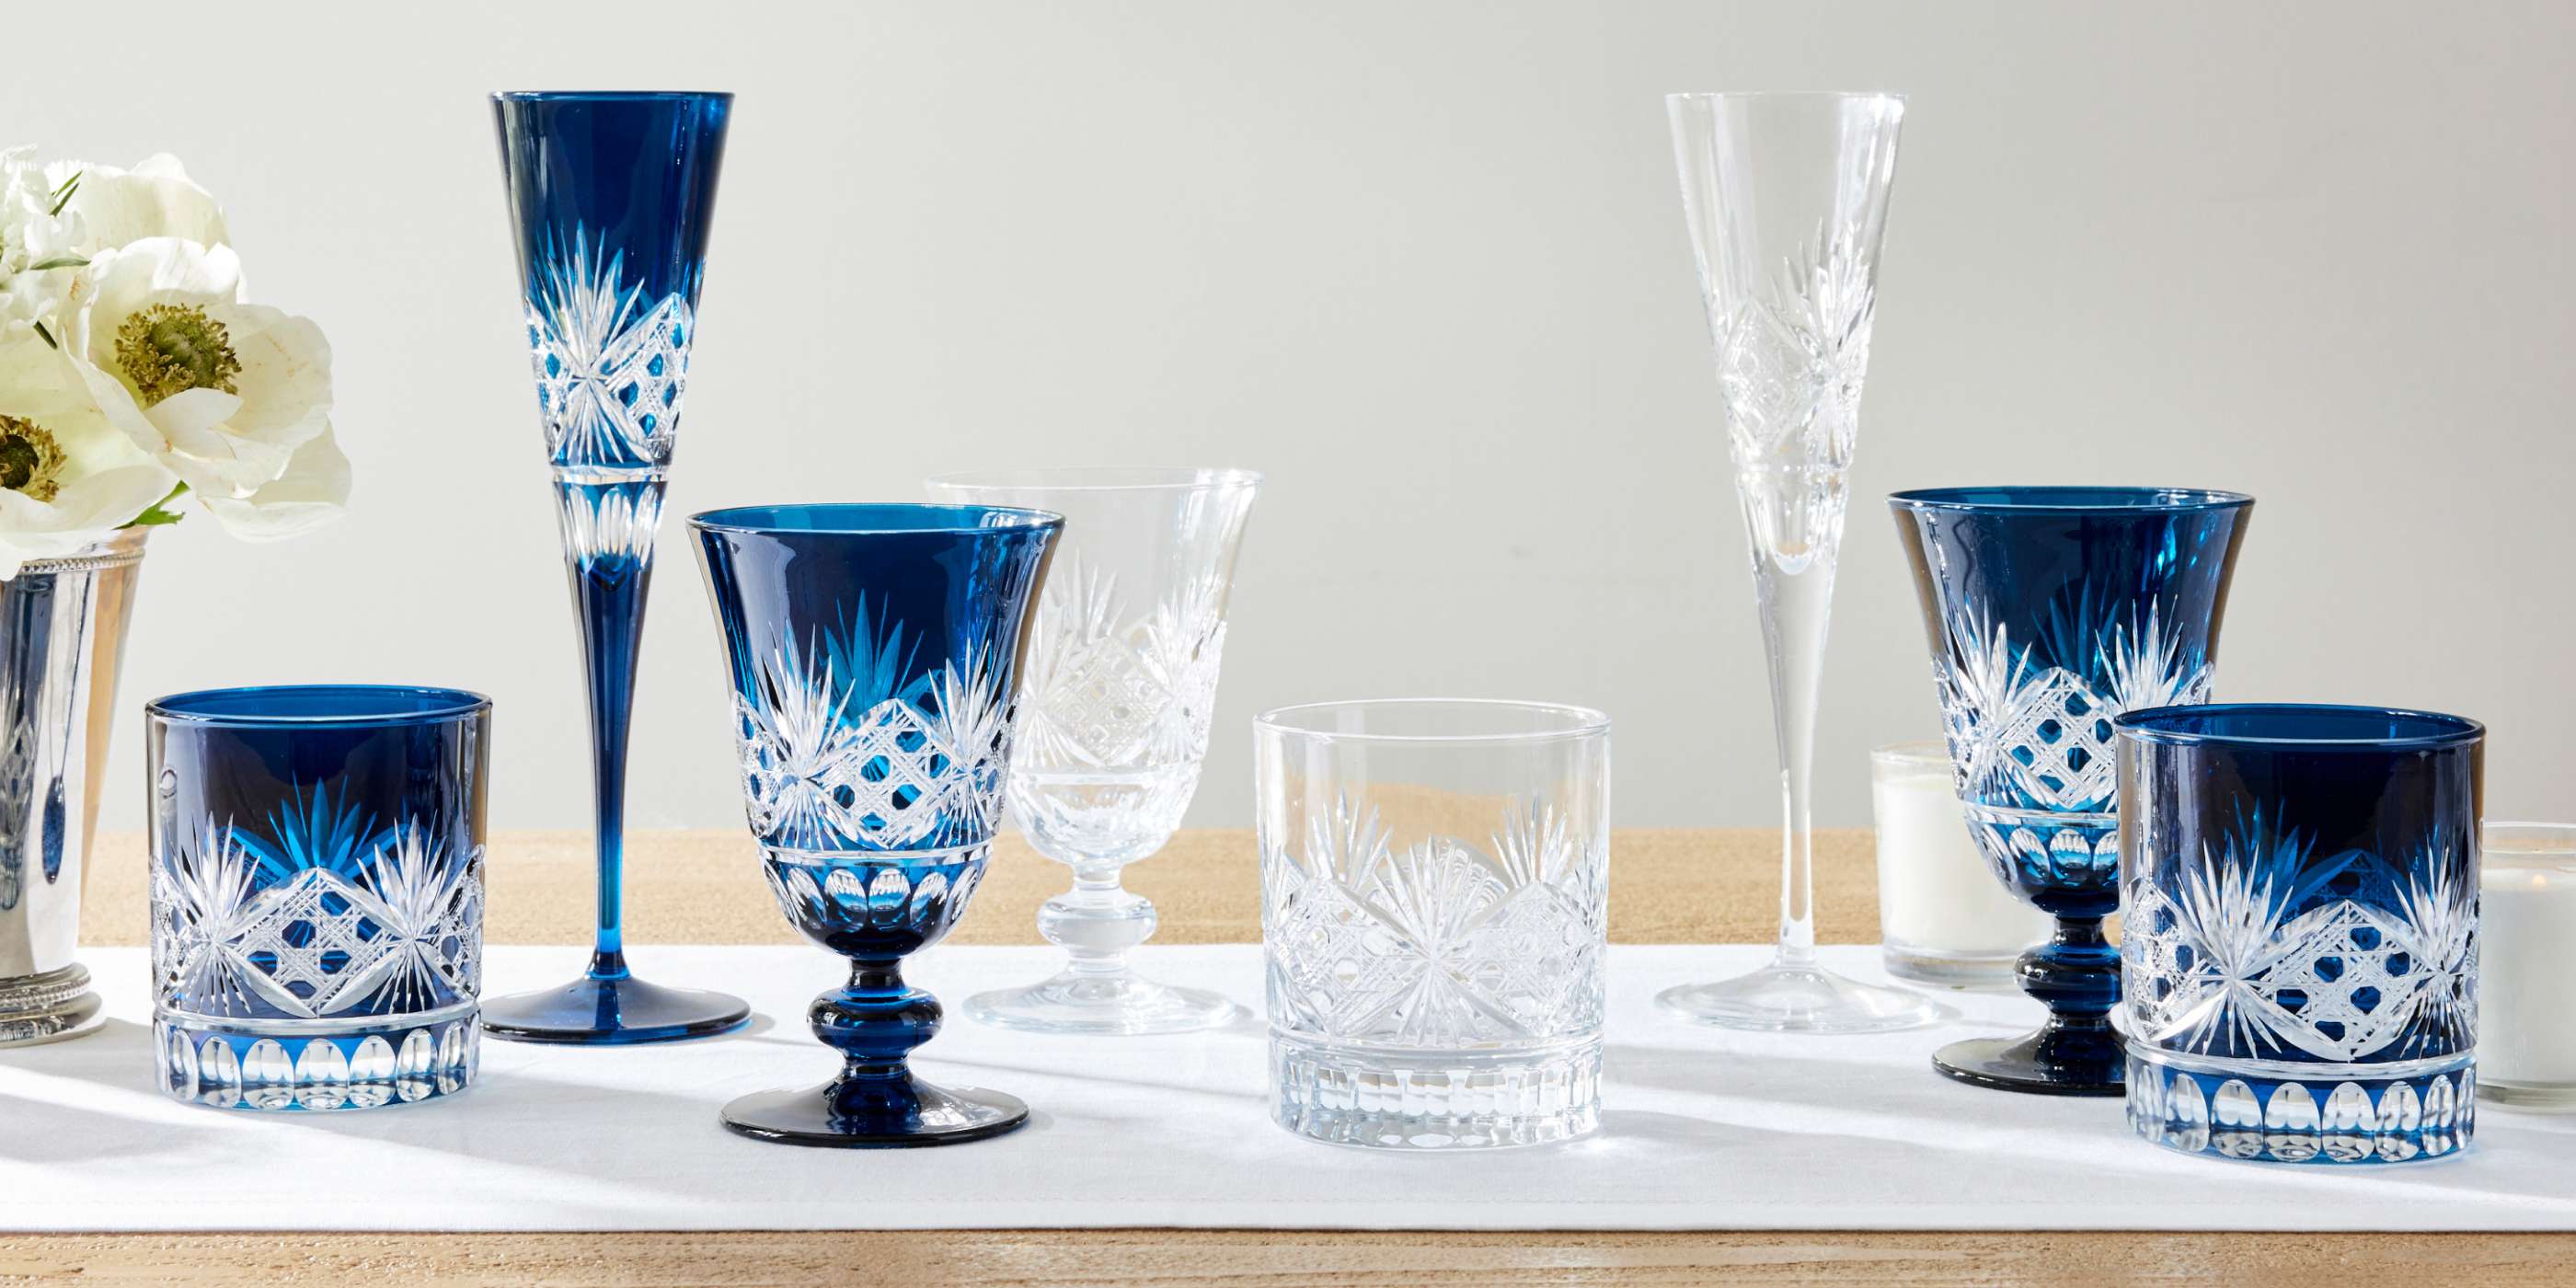 Glassware Collections - SP24  Pottery Barn, Glassware Collections